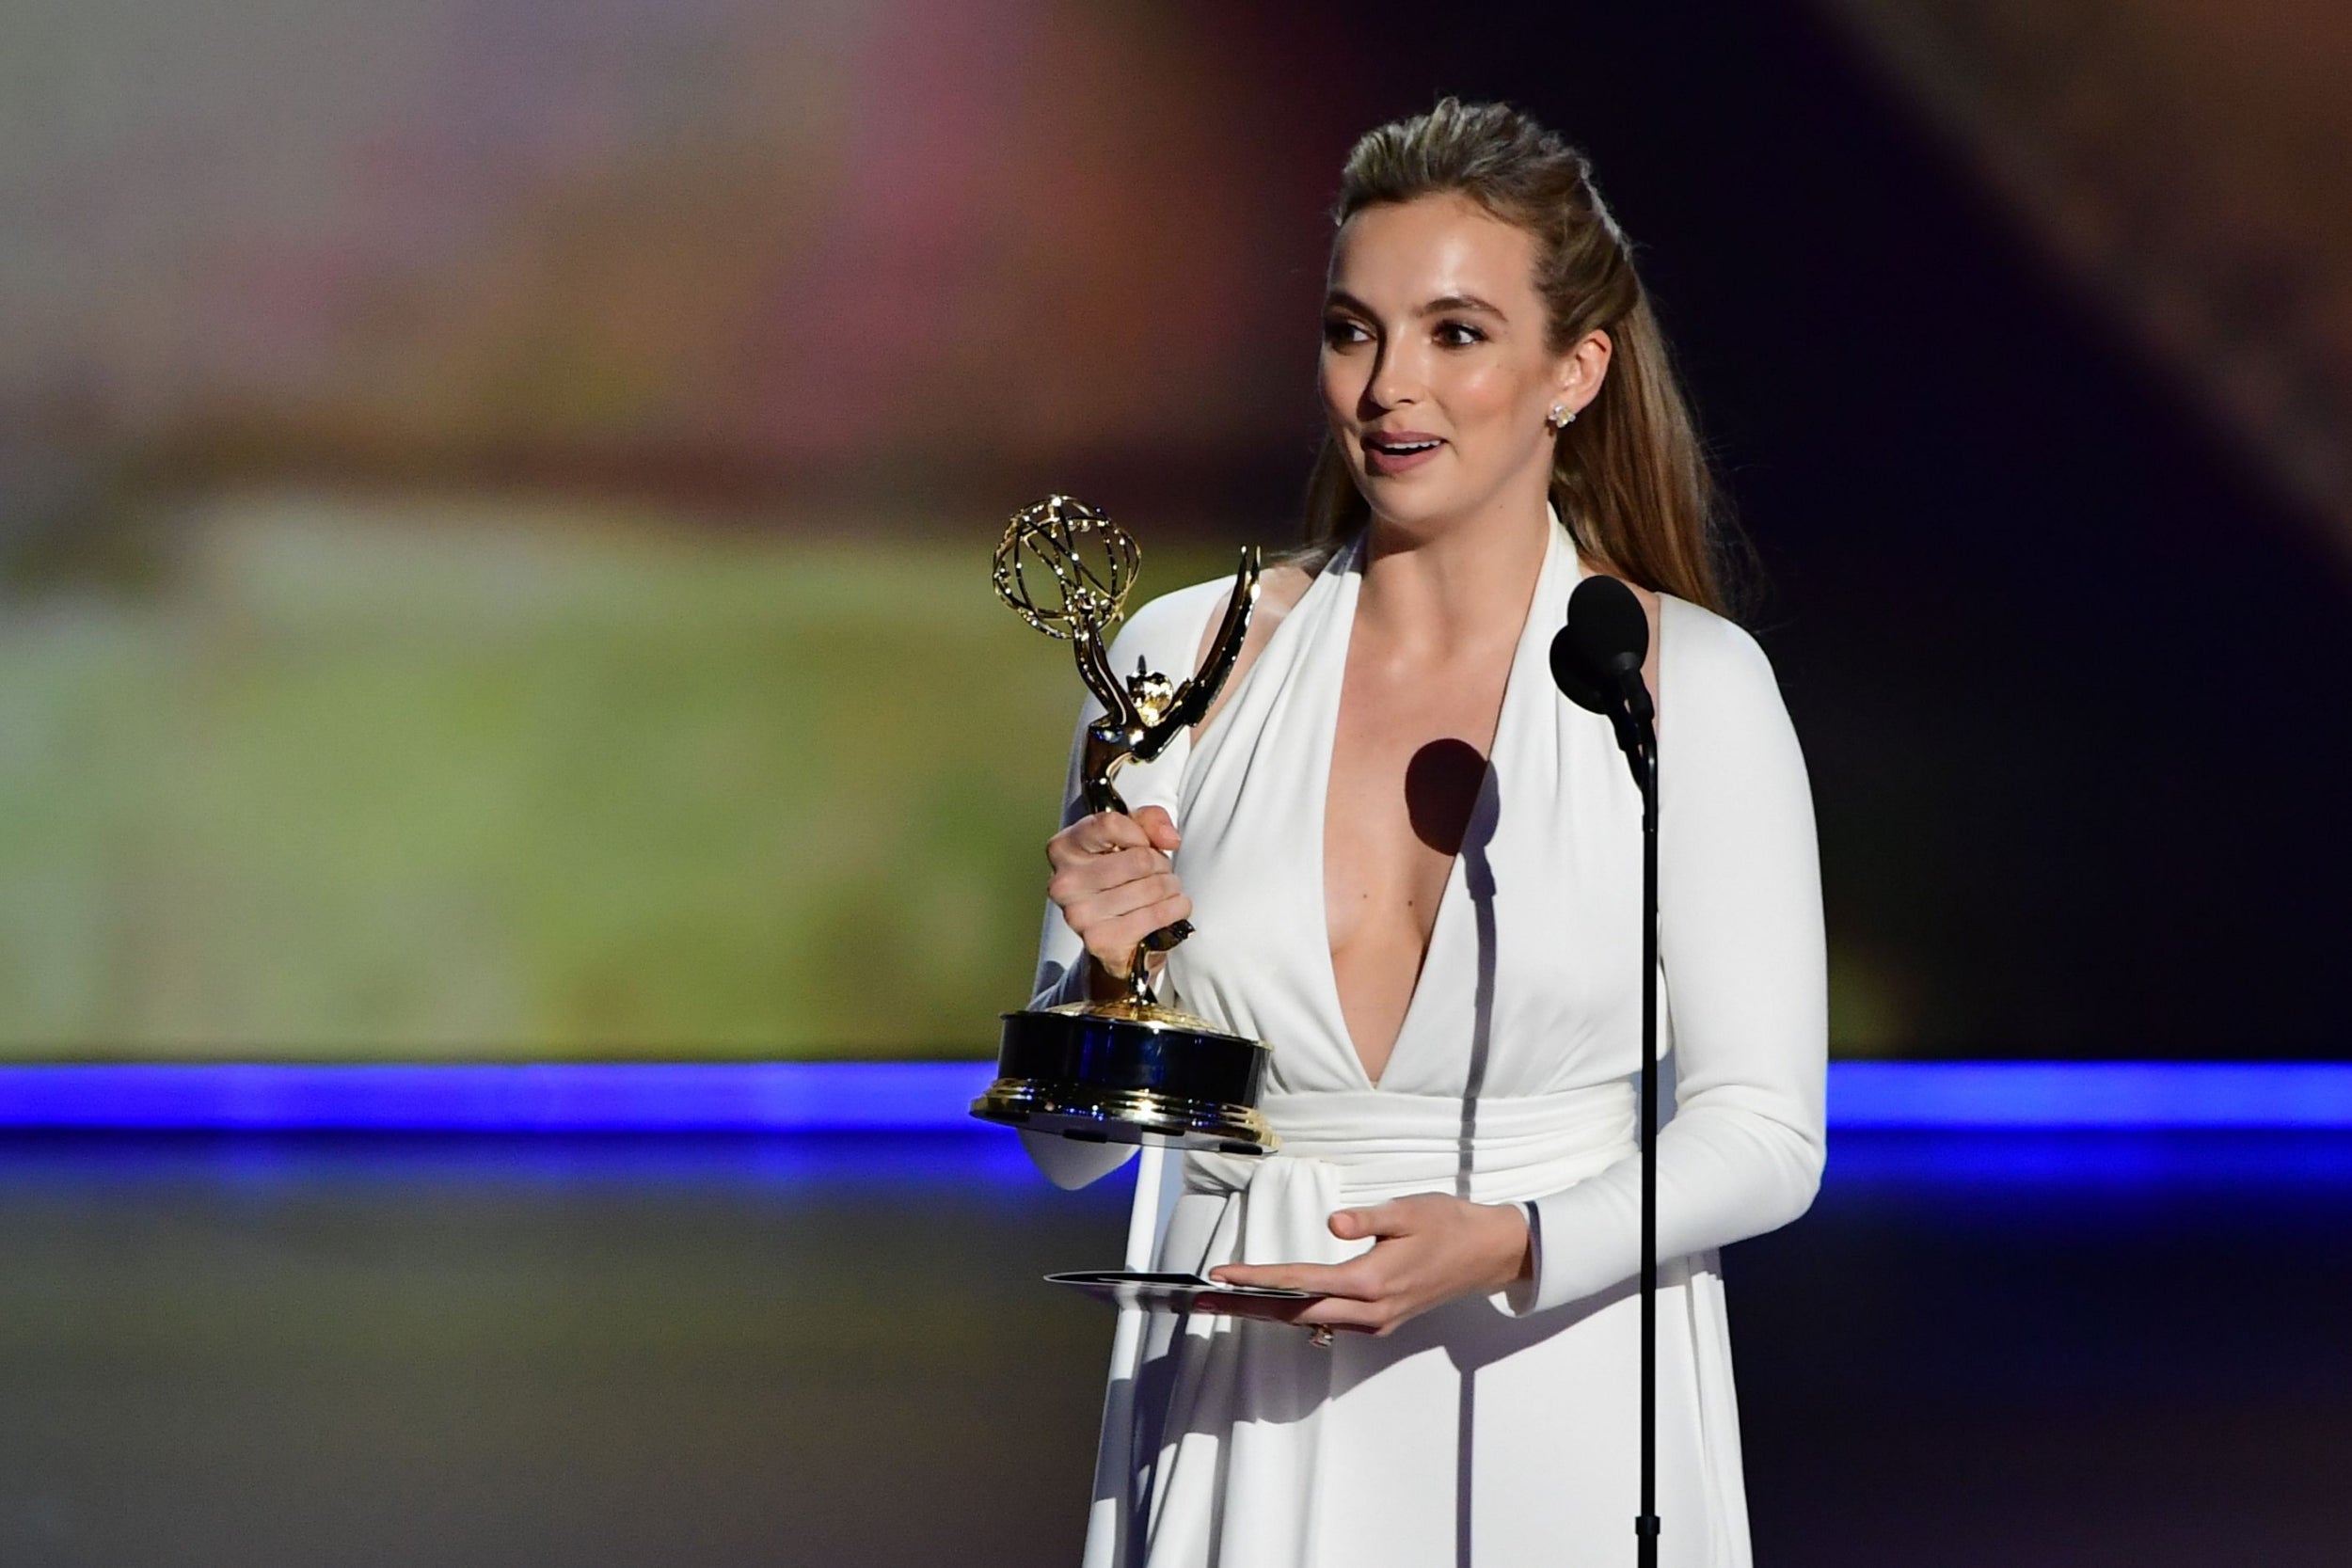 ‘Killing Eve’ actor Jodie Comer was stunned to pick up an award